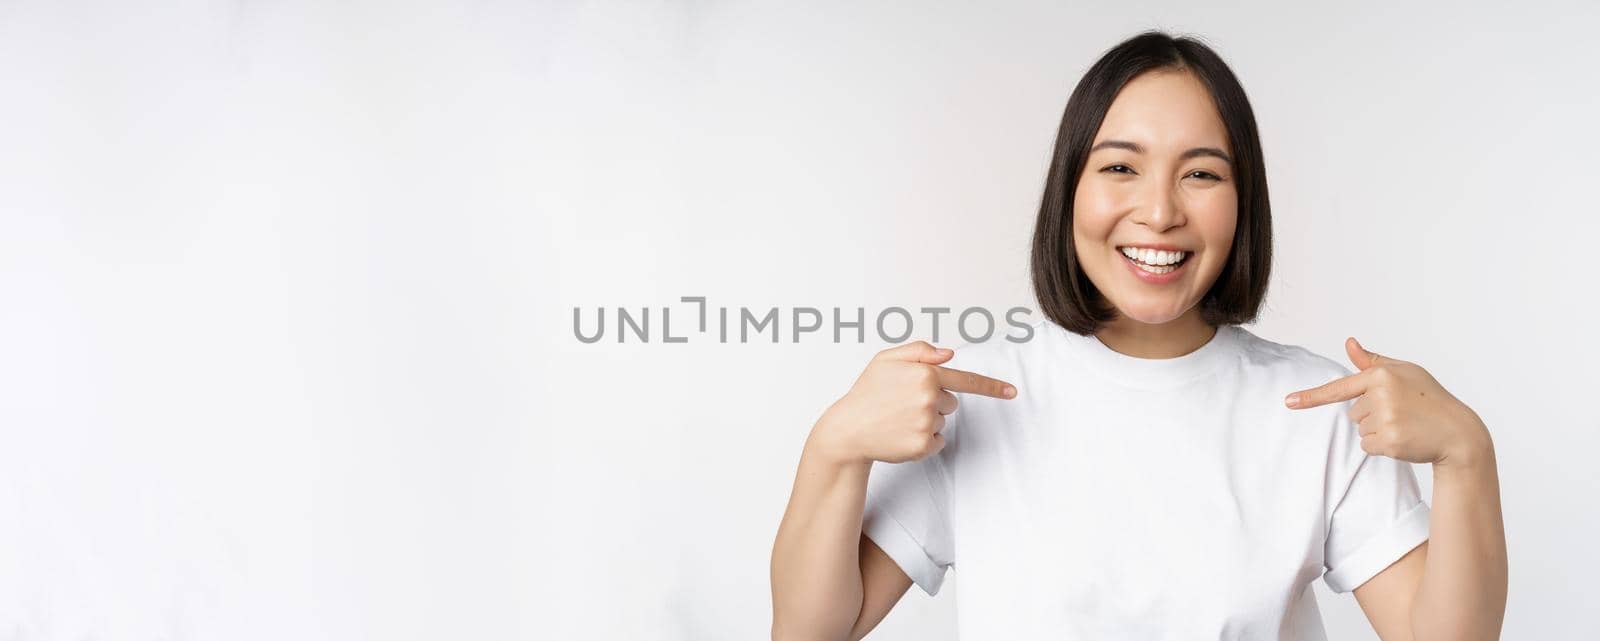 Happy and confident asian woman, student smiling and pointing at herself, self-promoting, showing logo on t-shirt, standing over white background.